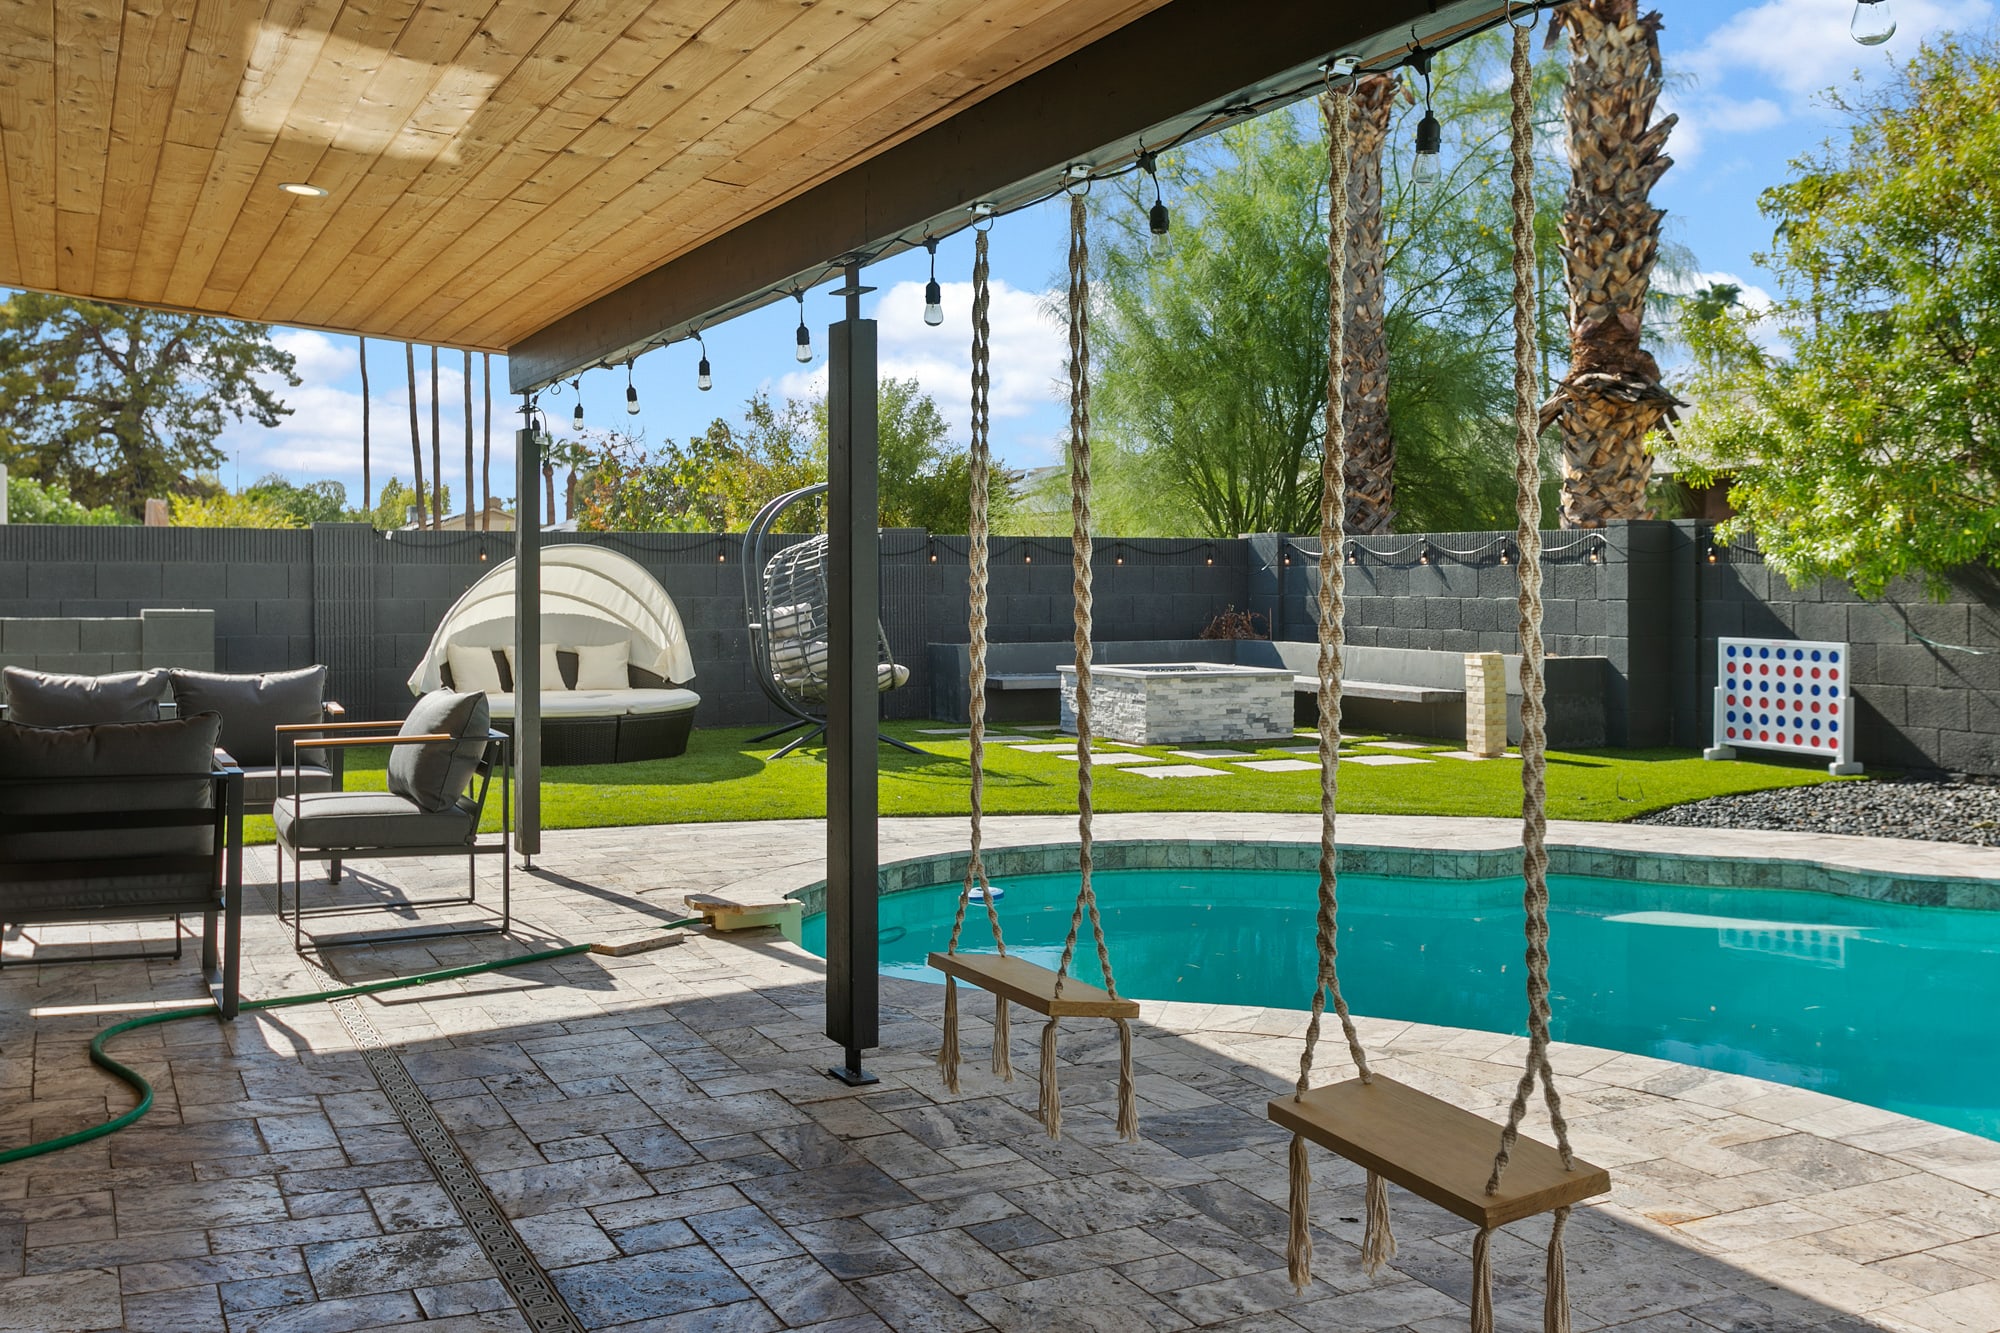 Sit on a swing by the heated pool!